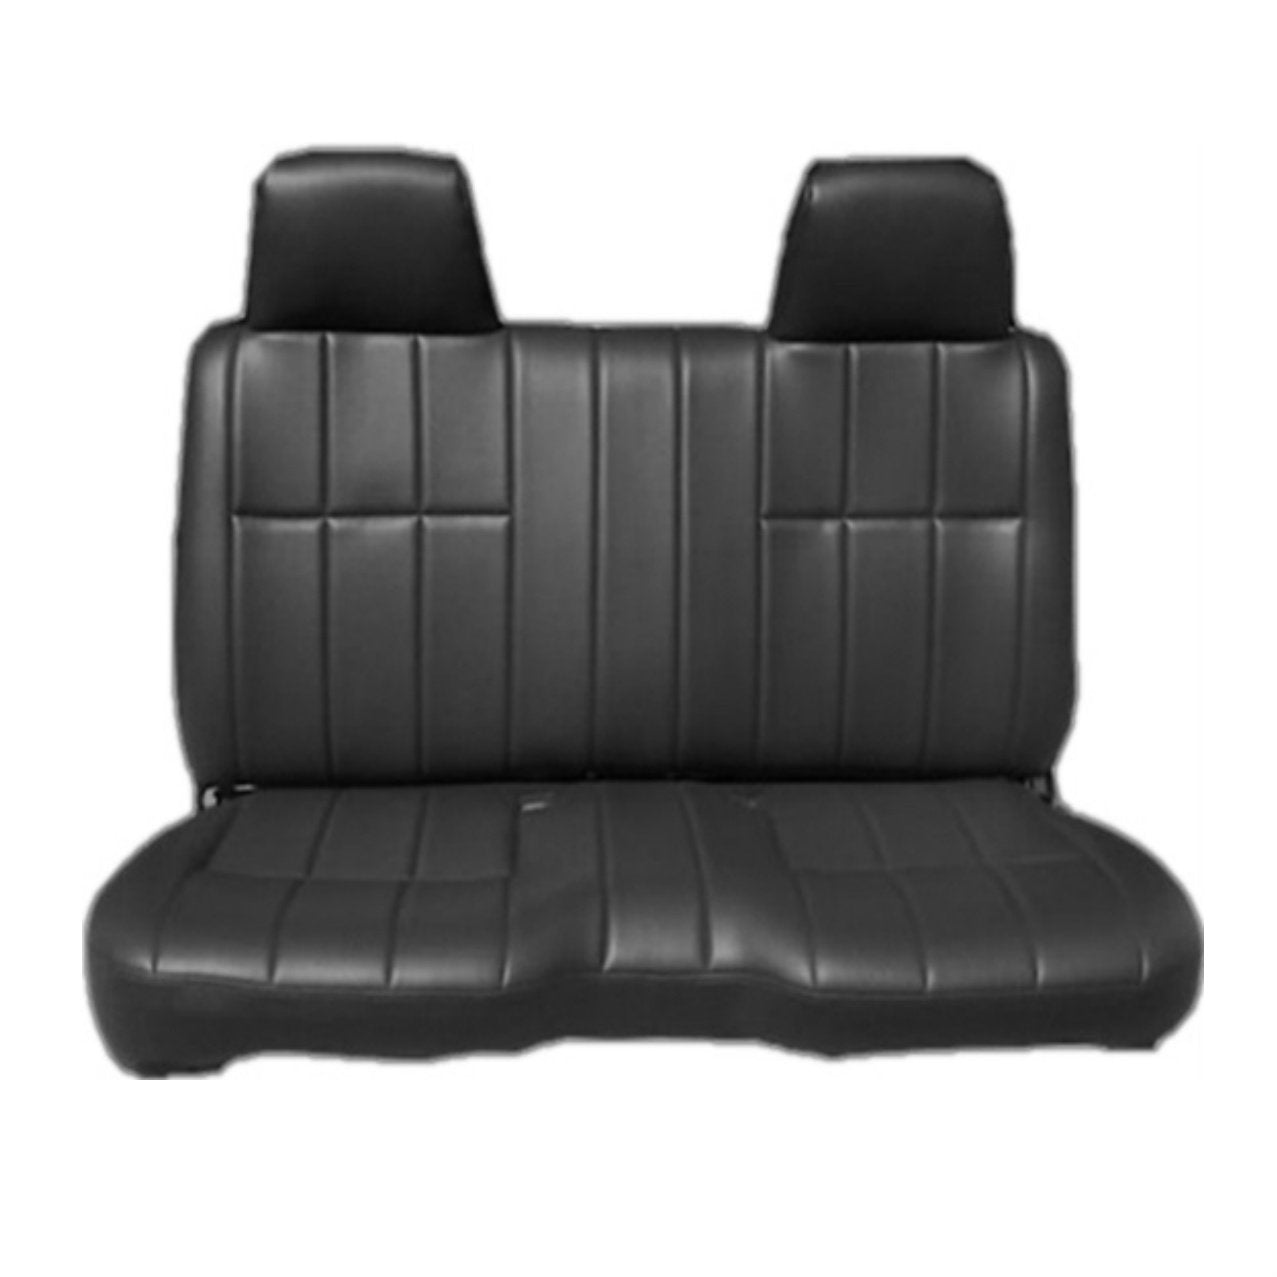 Toyota Pickup Geniune PU Leather Front Bench Seat Cover Exact Fit